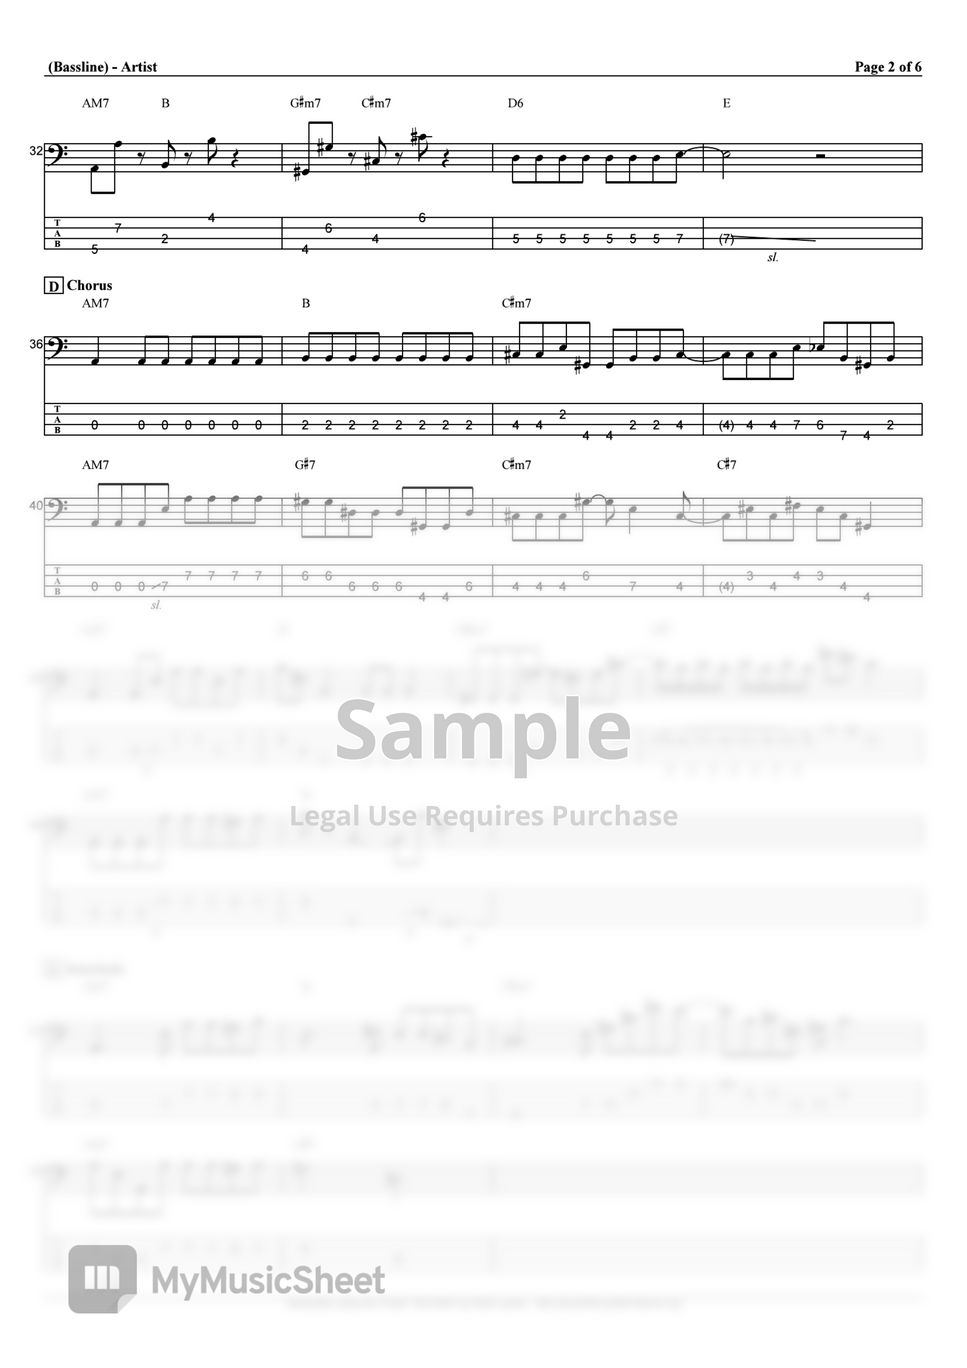 LiSA - 往け (Bass Tab 4-strings) by T's bass score